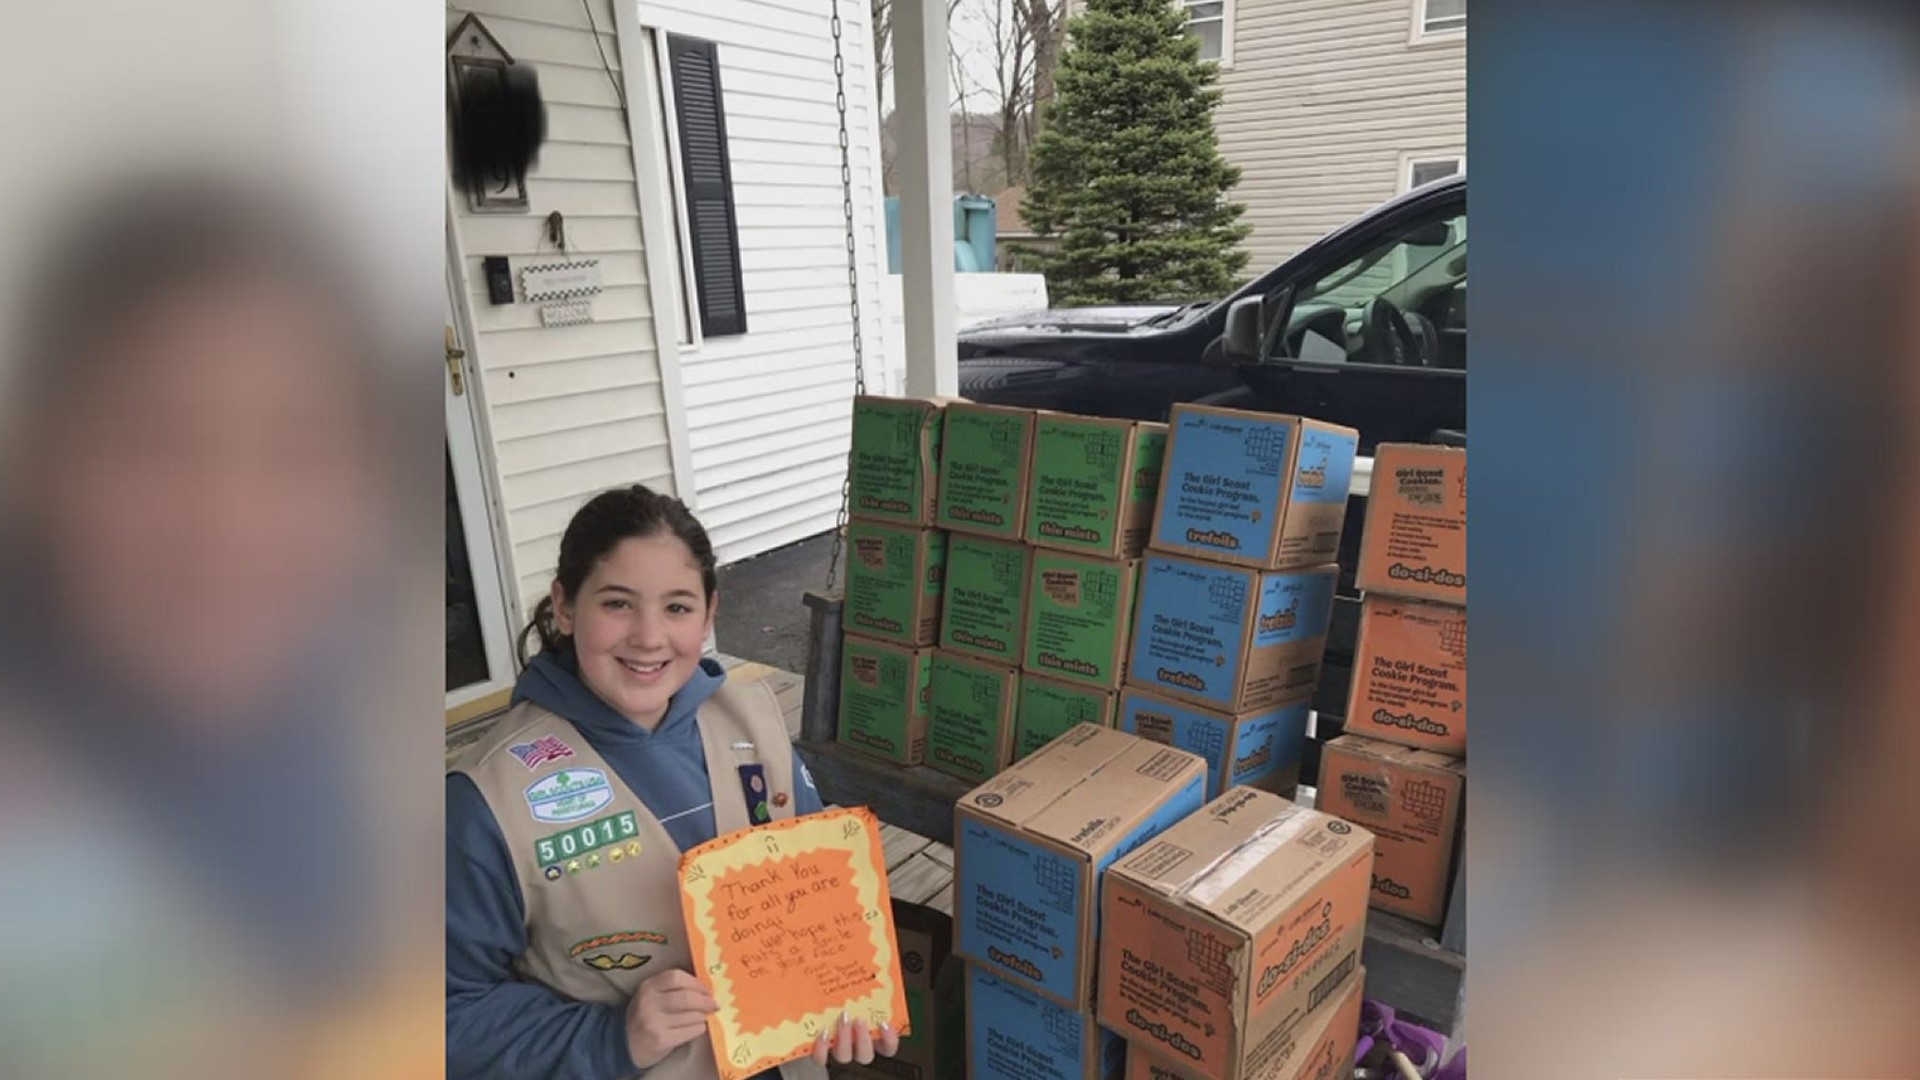 A girl scout troop from Wyoming County is saying thanks to healthcare workers.